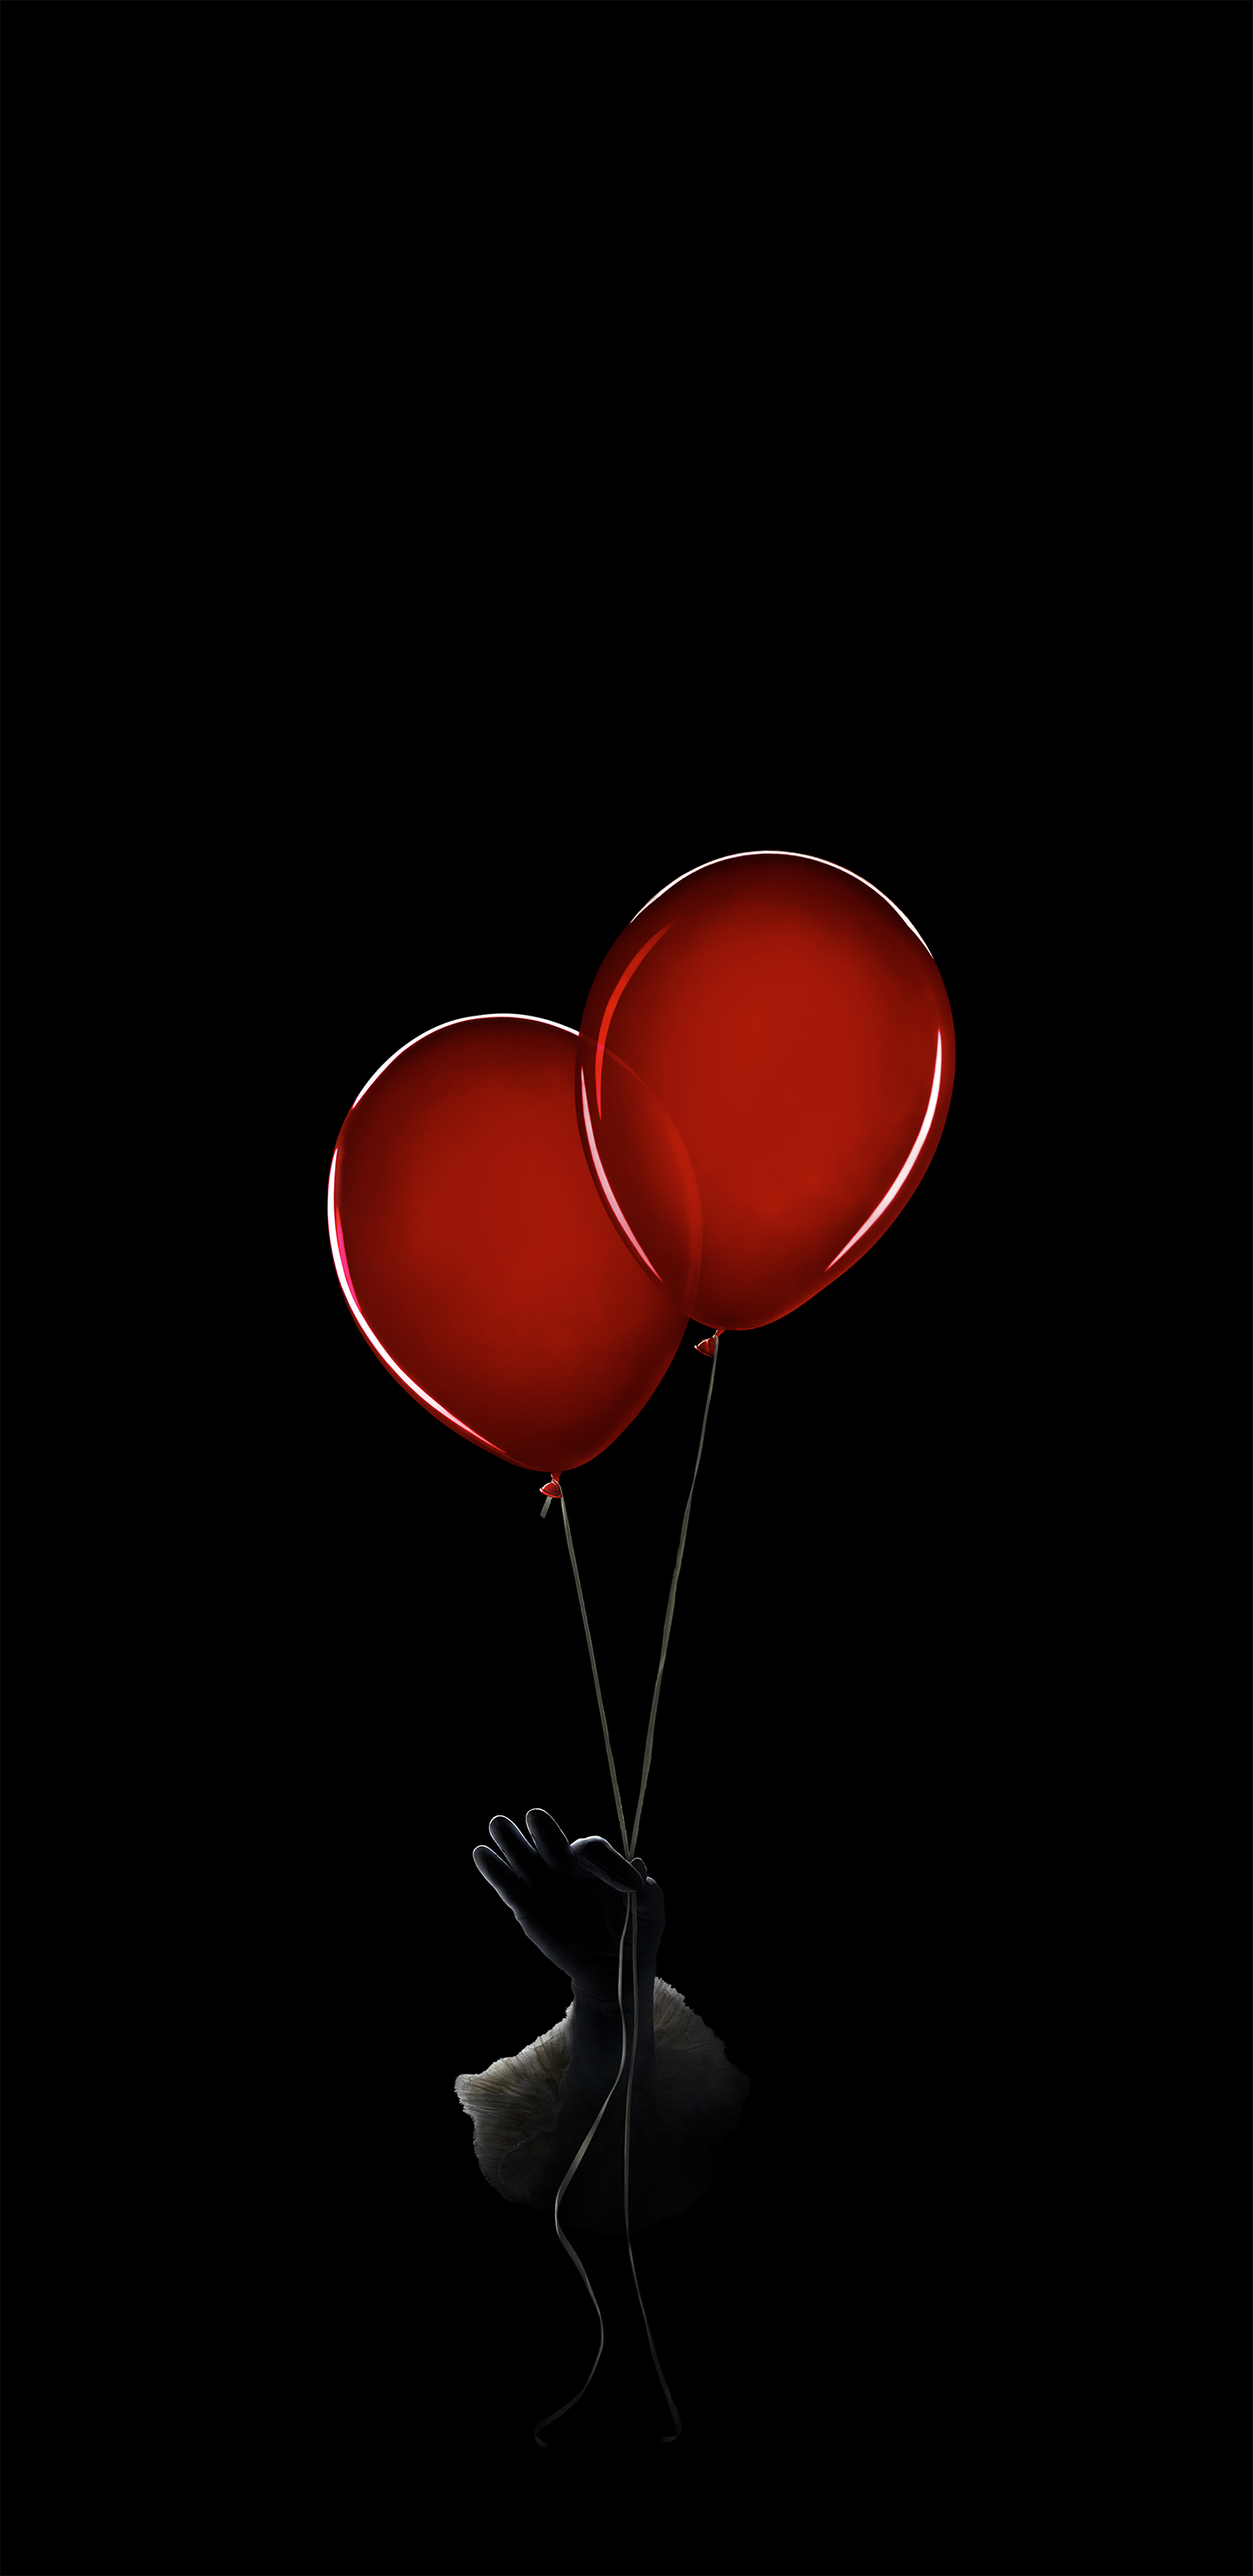 IT: Chapter Two, Textless AMOLED wallpaper [1440x2960]